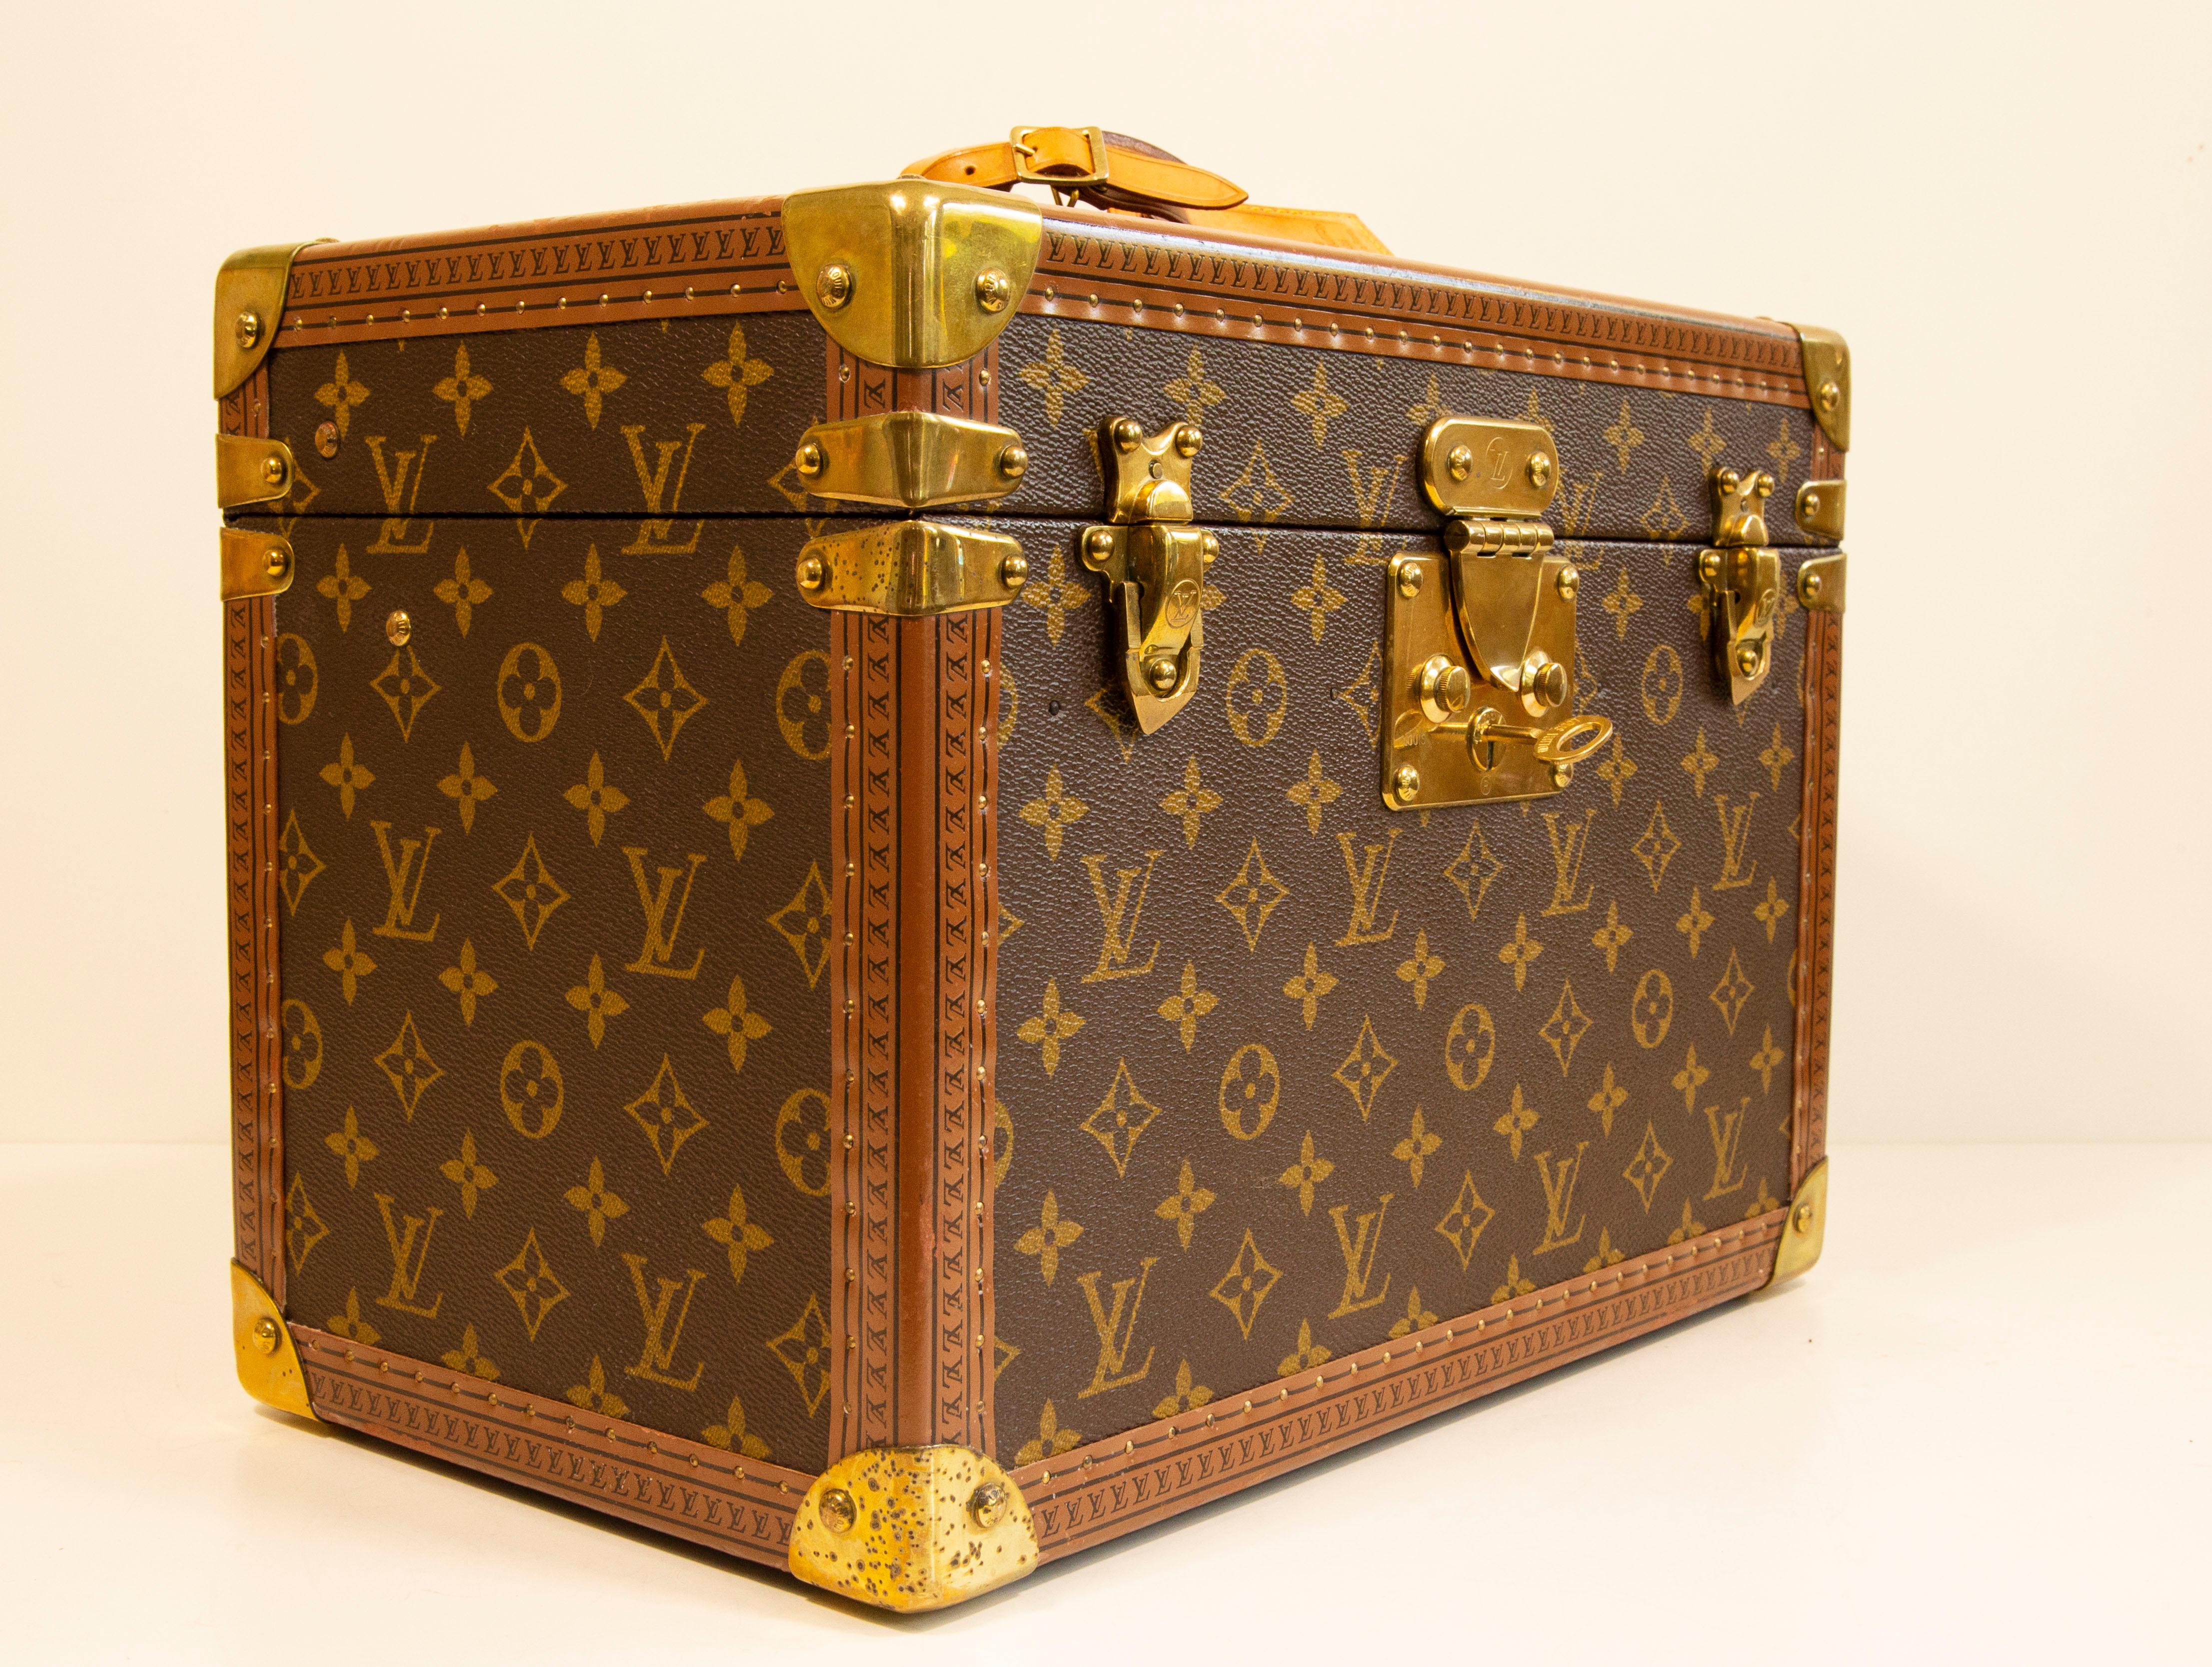 Louis Vuitton Monogram hard shell Boite Pharmacie Vanity Trunk Case. The item was manufactured in the late 1990'. It features brass hardware, push lock closure including the key, vachetta leather top handle, vachetta leather tag. The interior is